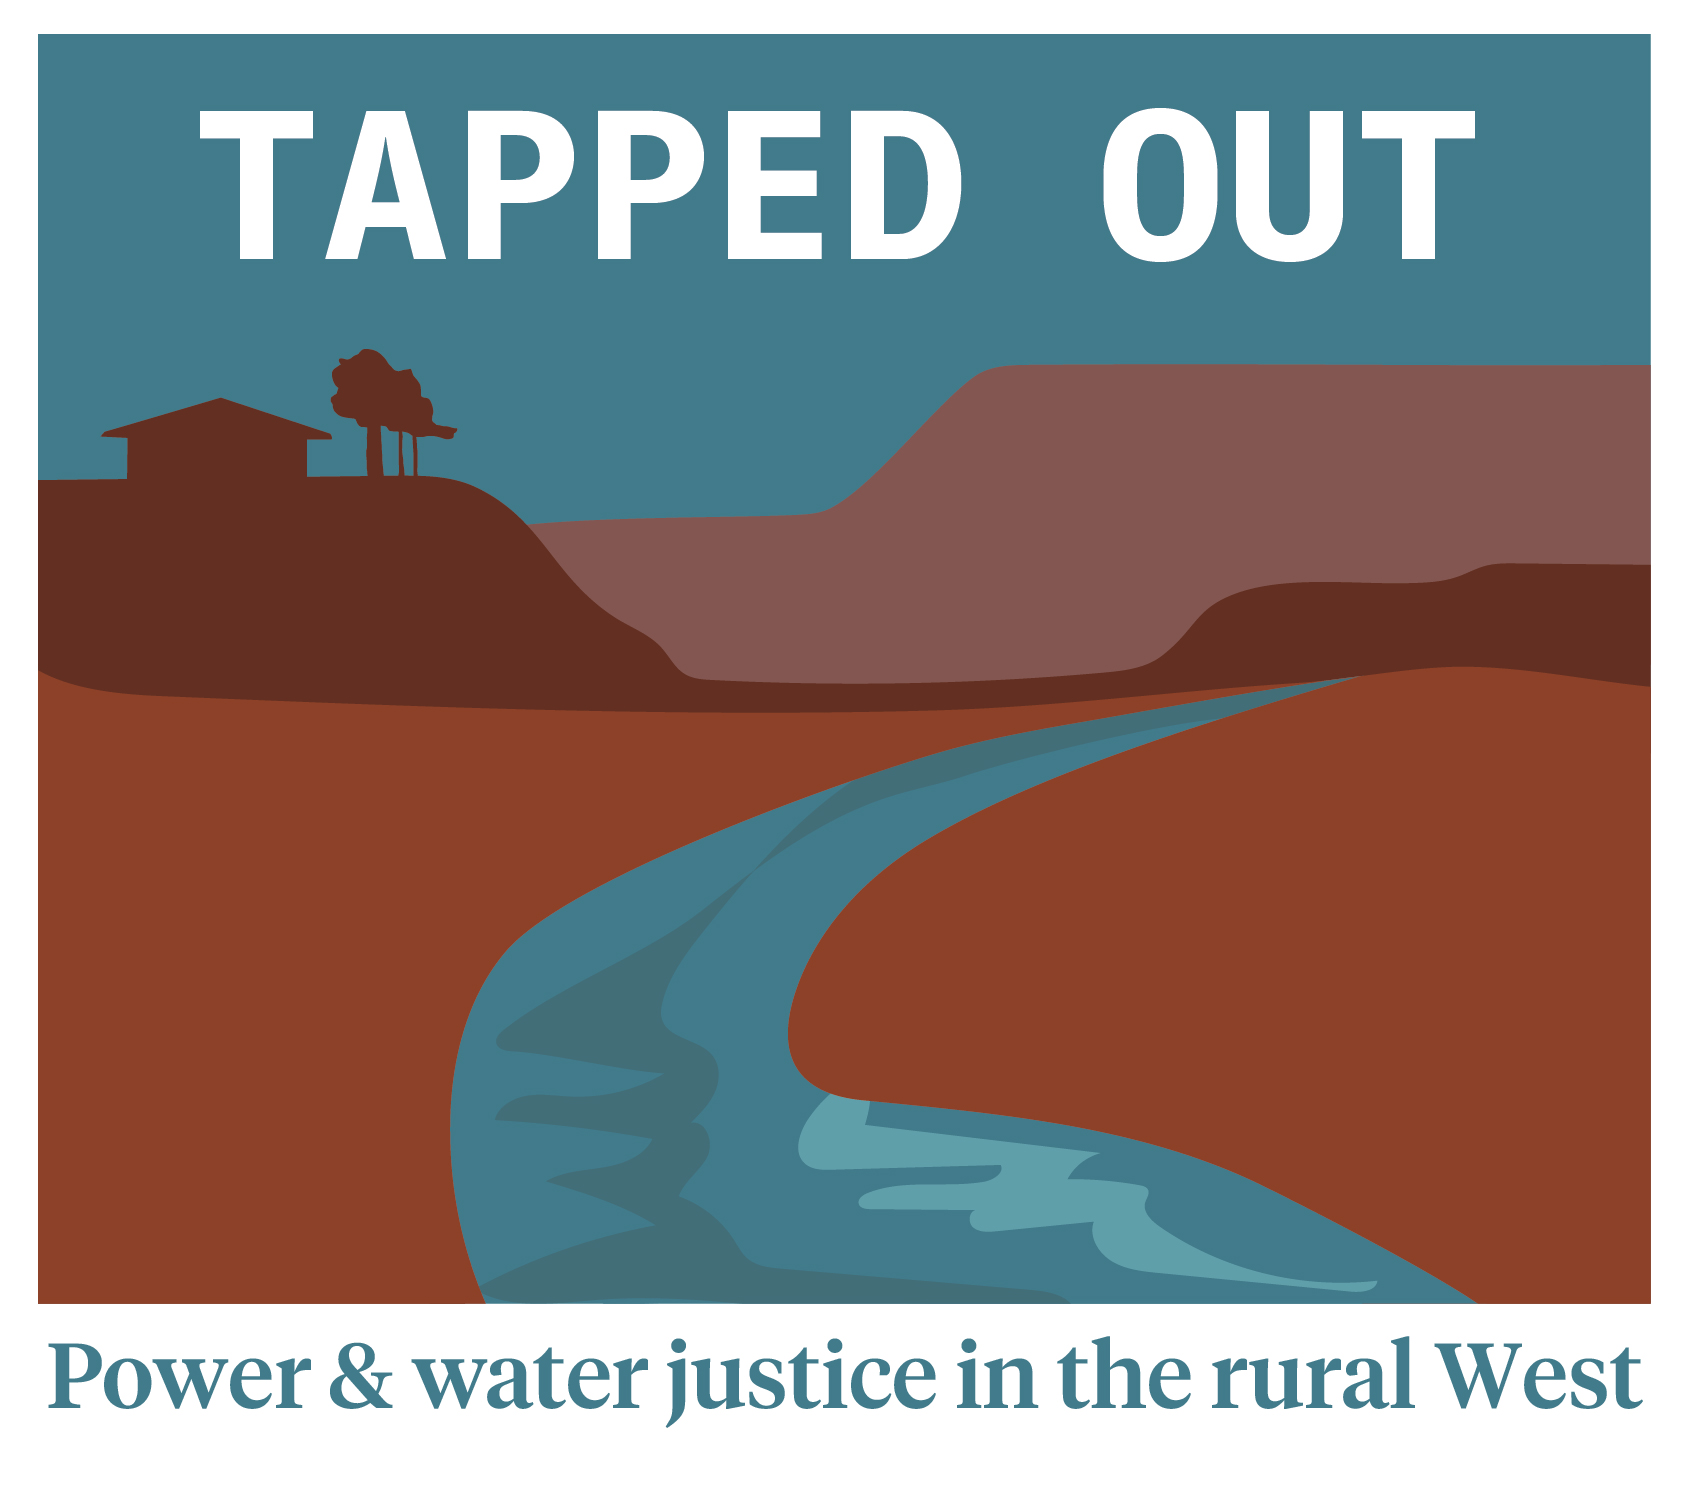 Tapped Out: Power & water justice in the rural West